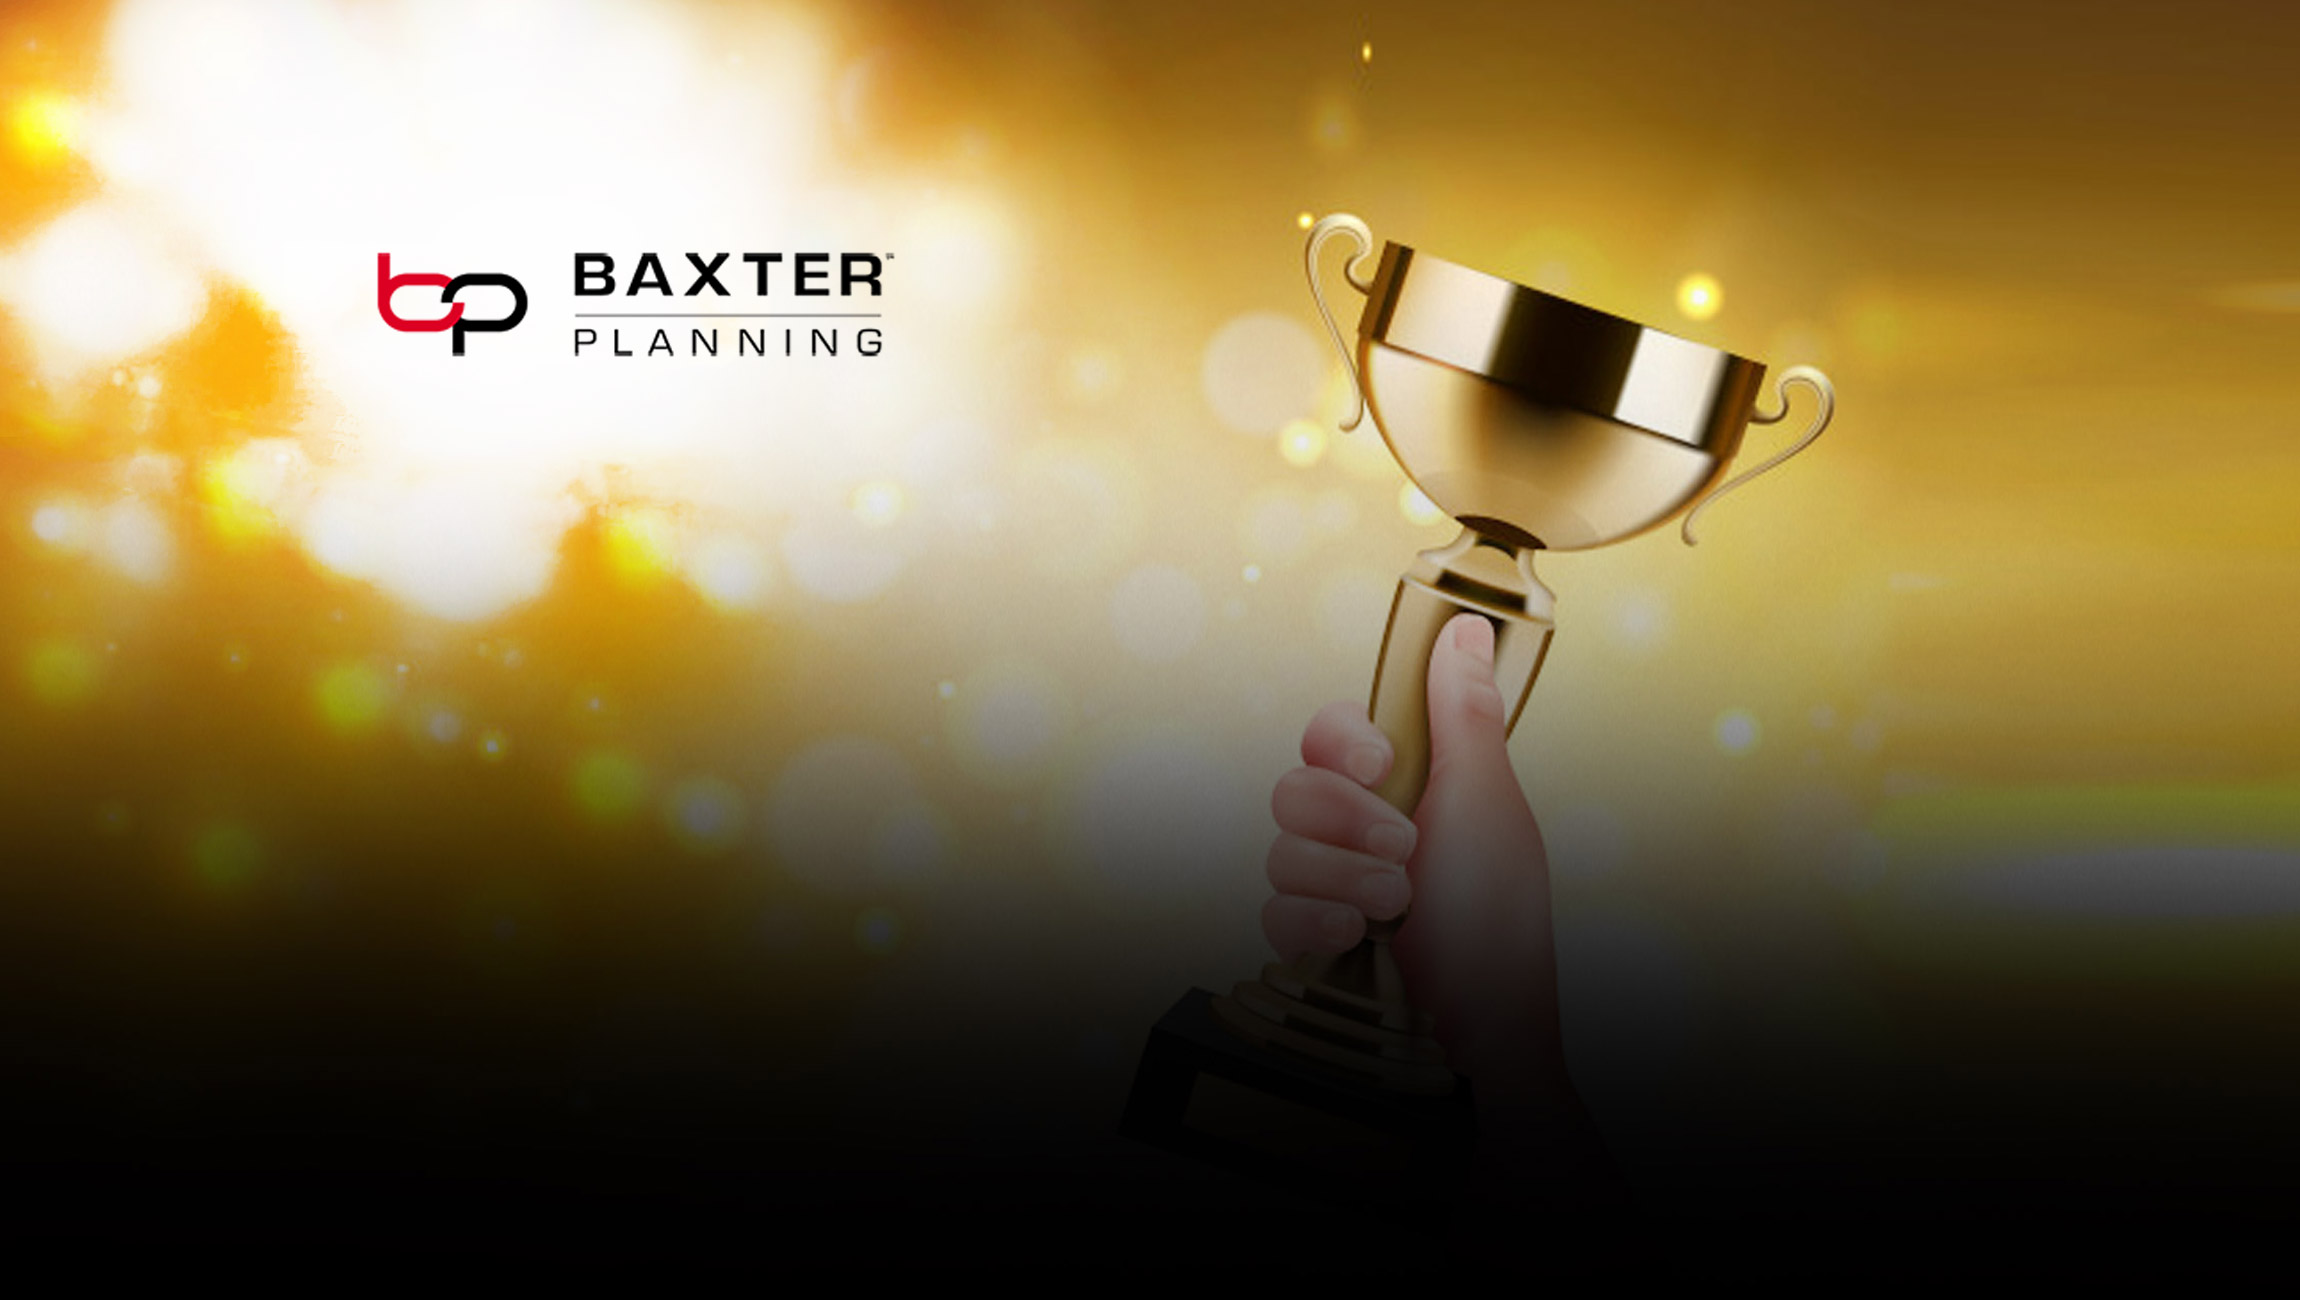 Baxter Planning recognizes winners of Supply & Demand Chain Executive’s 2021 Women in Supply Chain Award